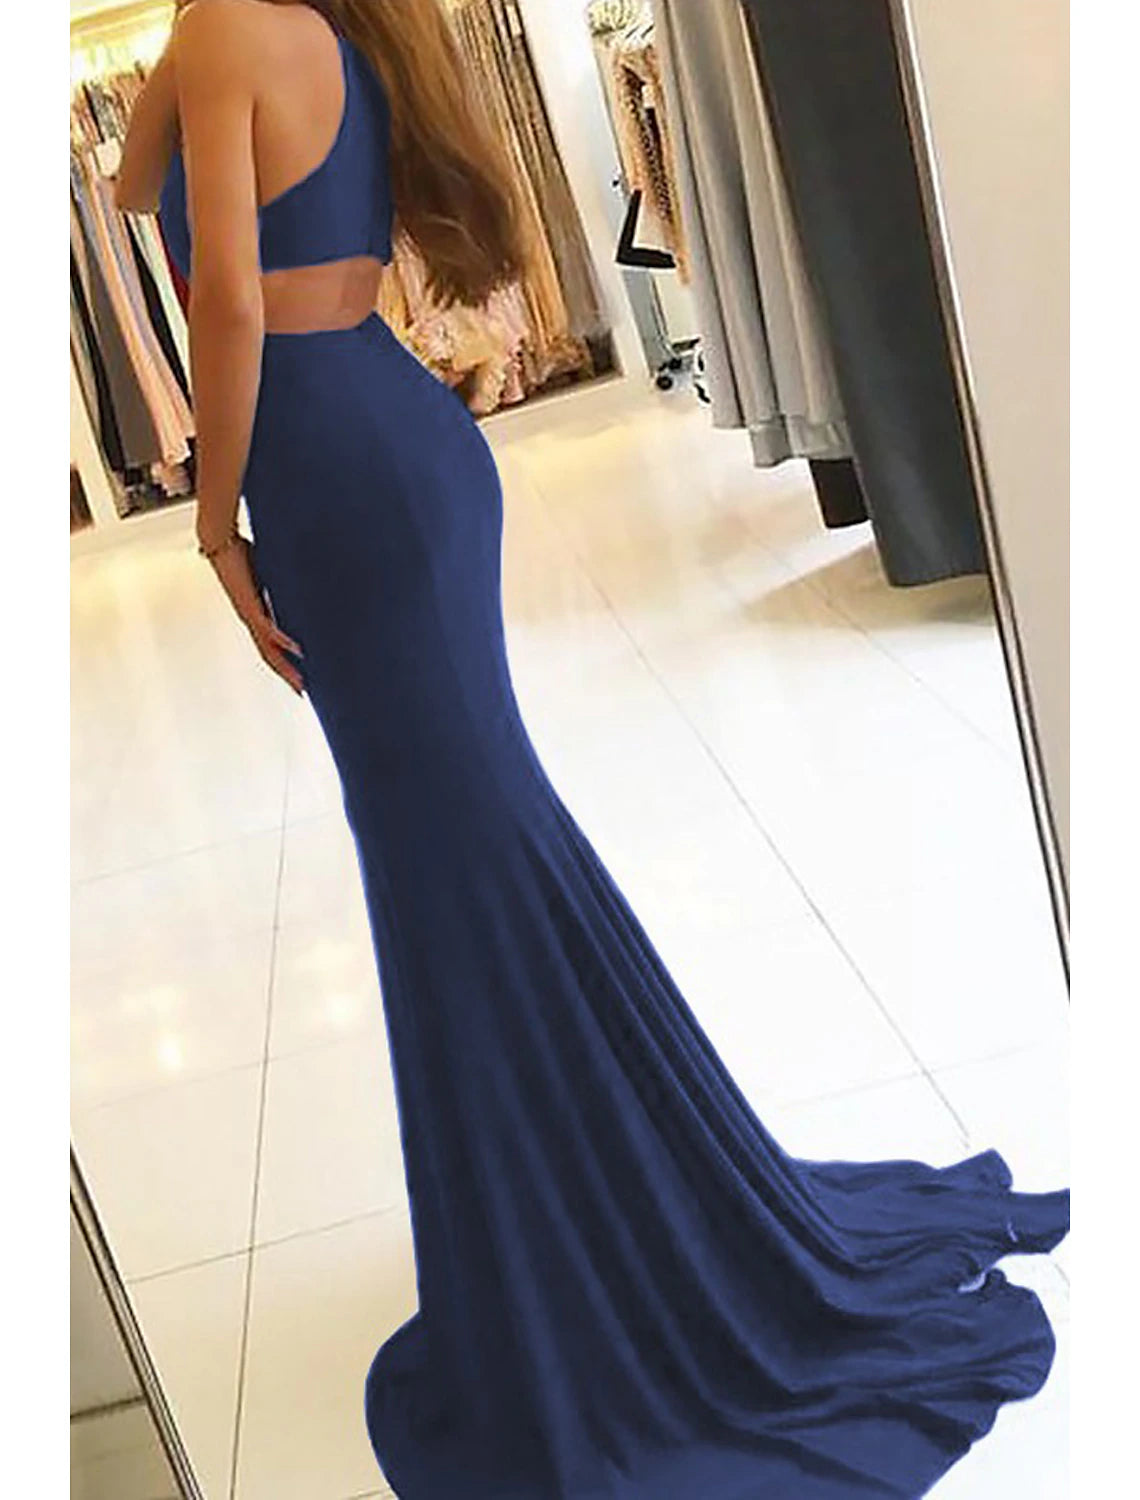 Mermaid / Trumpet Evening Gown Bodycon Dress Formal Prom Court Train Sleeveless High Neck Stretch Fabric